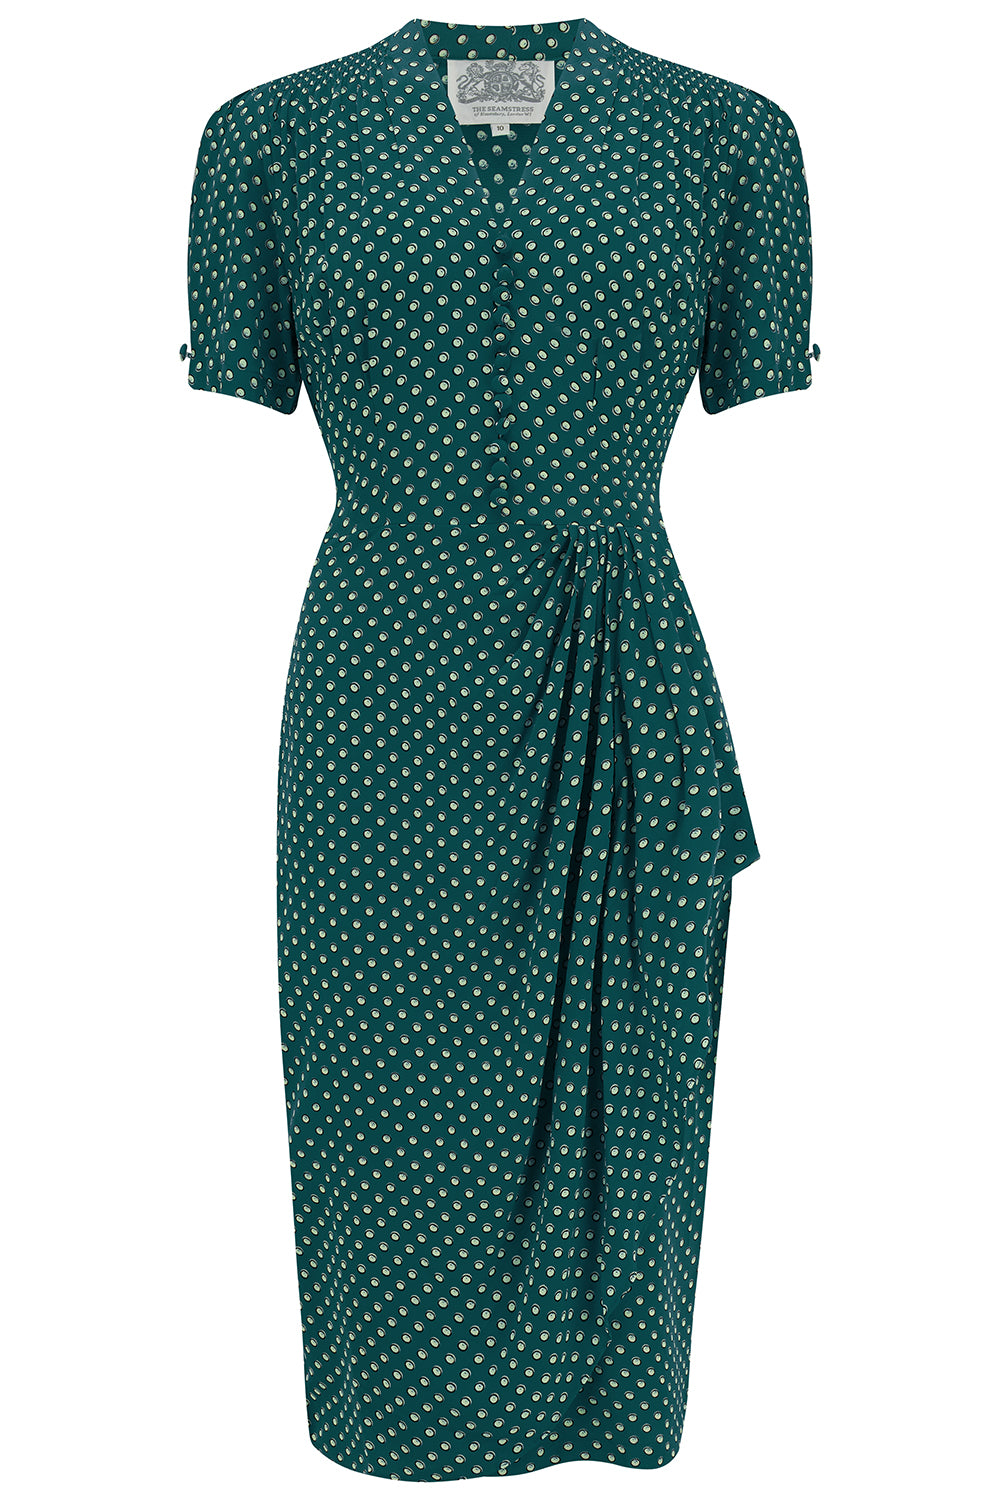 "Mabel dress "Green Ditsy , A Classic 1940s Inspired Vintage Style CC41 By The Seamstress Of Bloomsbury - CC41, Goodwood Revival, Twinwood Festival, Viva Las Vegas Rockabilly Weekend Rock n Romance The Seamstress of Bloomsbury